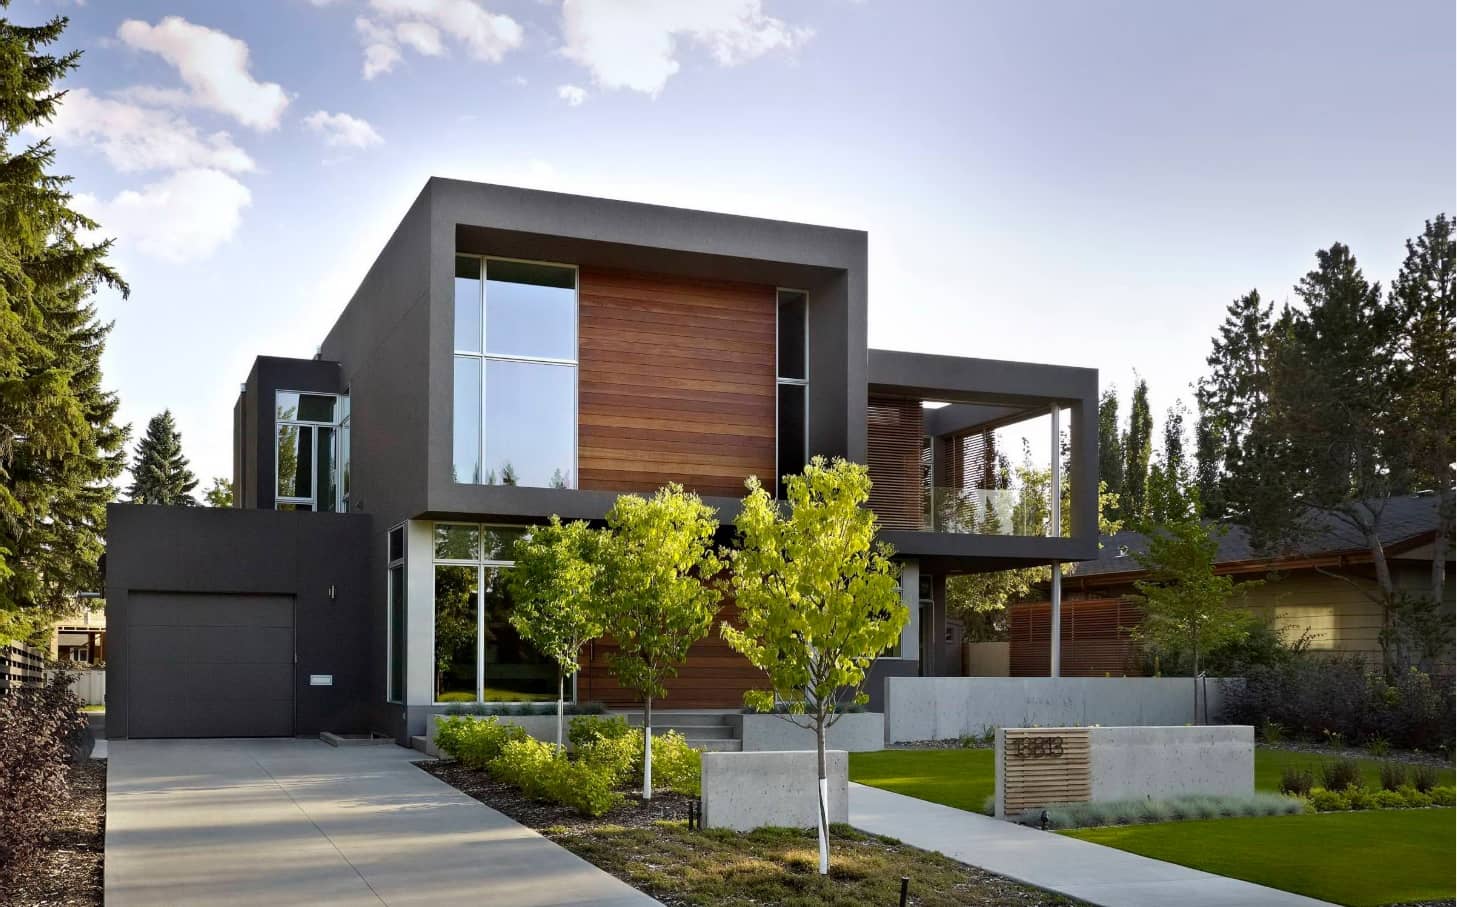 Disclosures You Should Make When Selling Your Home in Edmonton. Innovative house exterior design